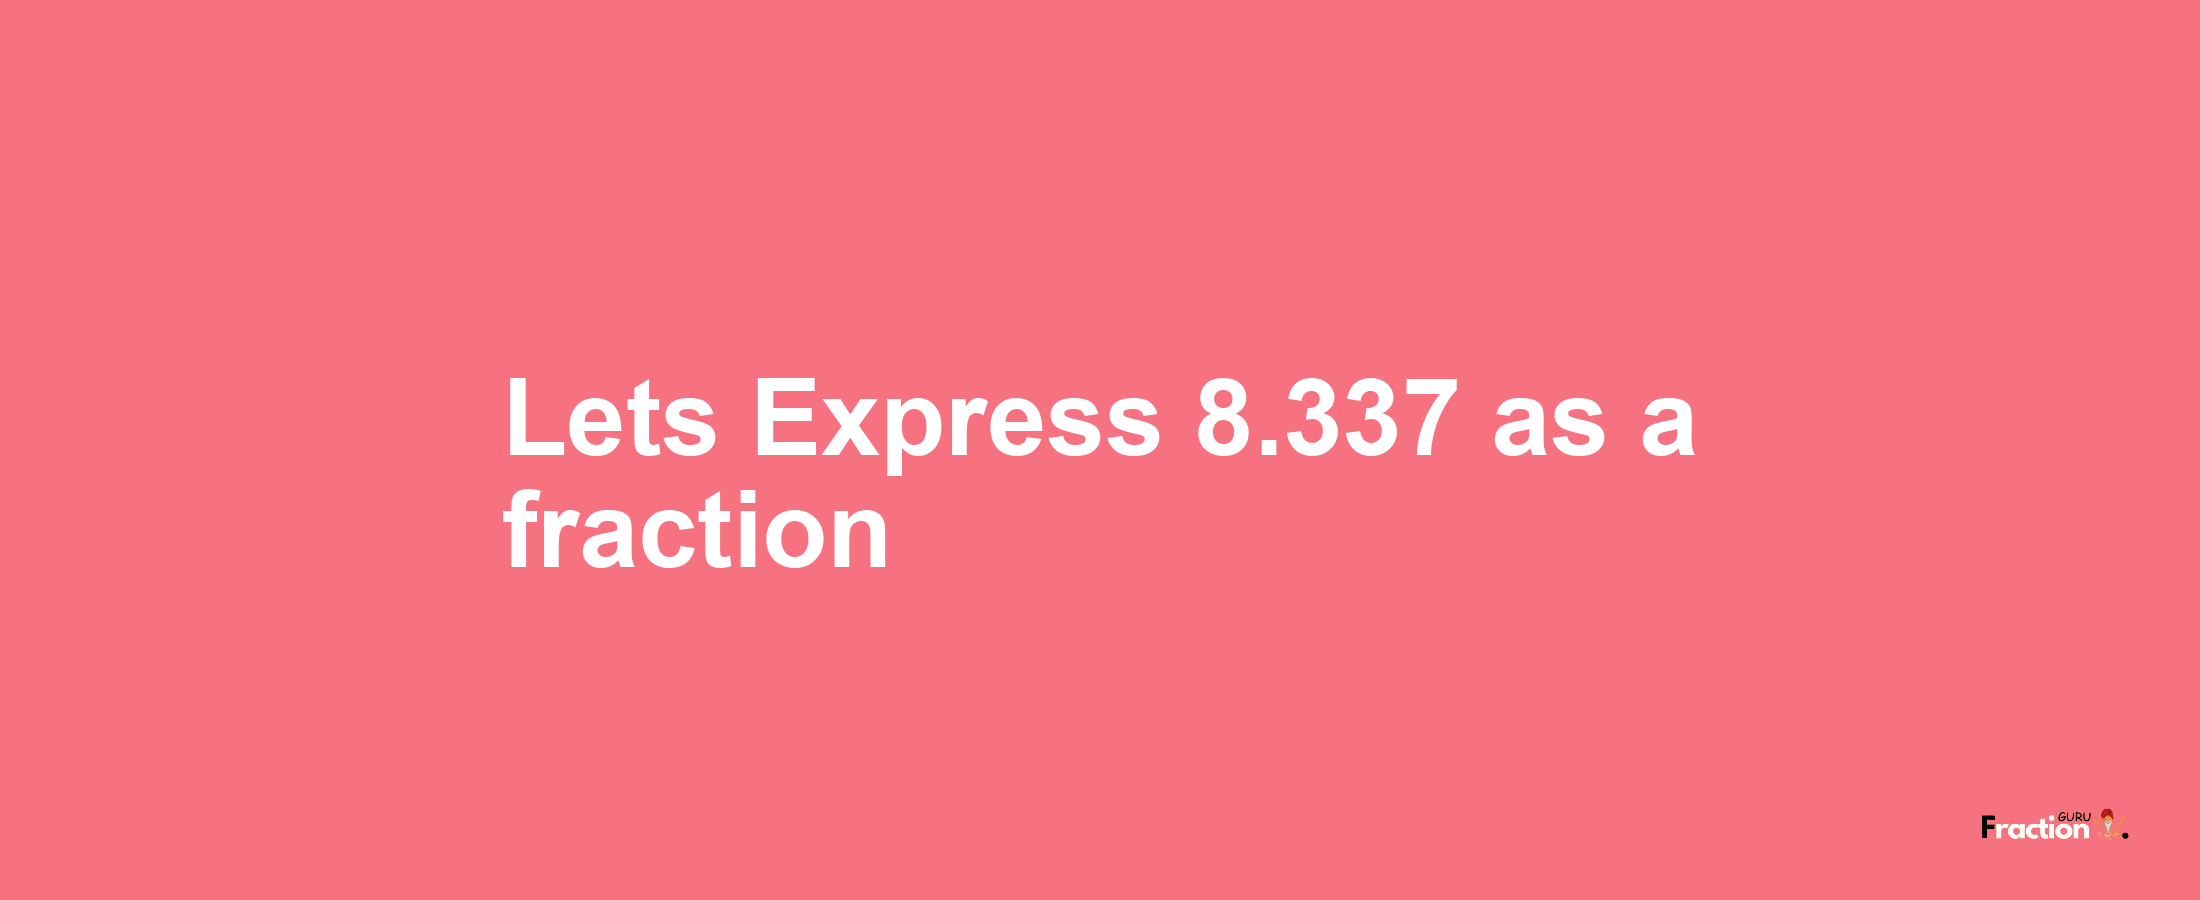 Lets Express 8.337 as afraction